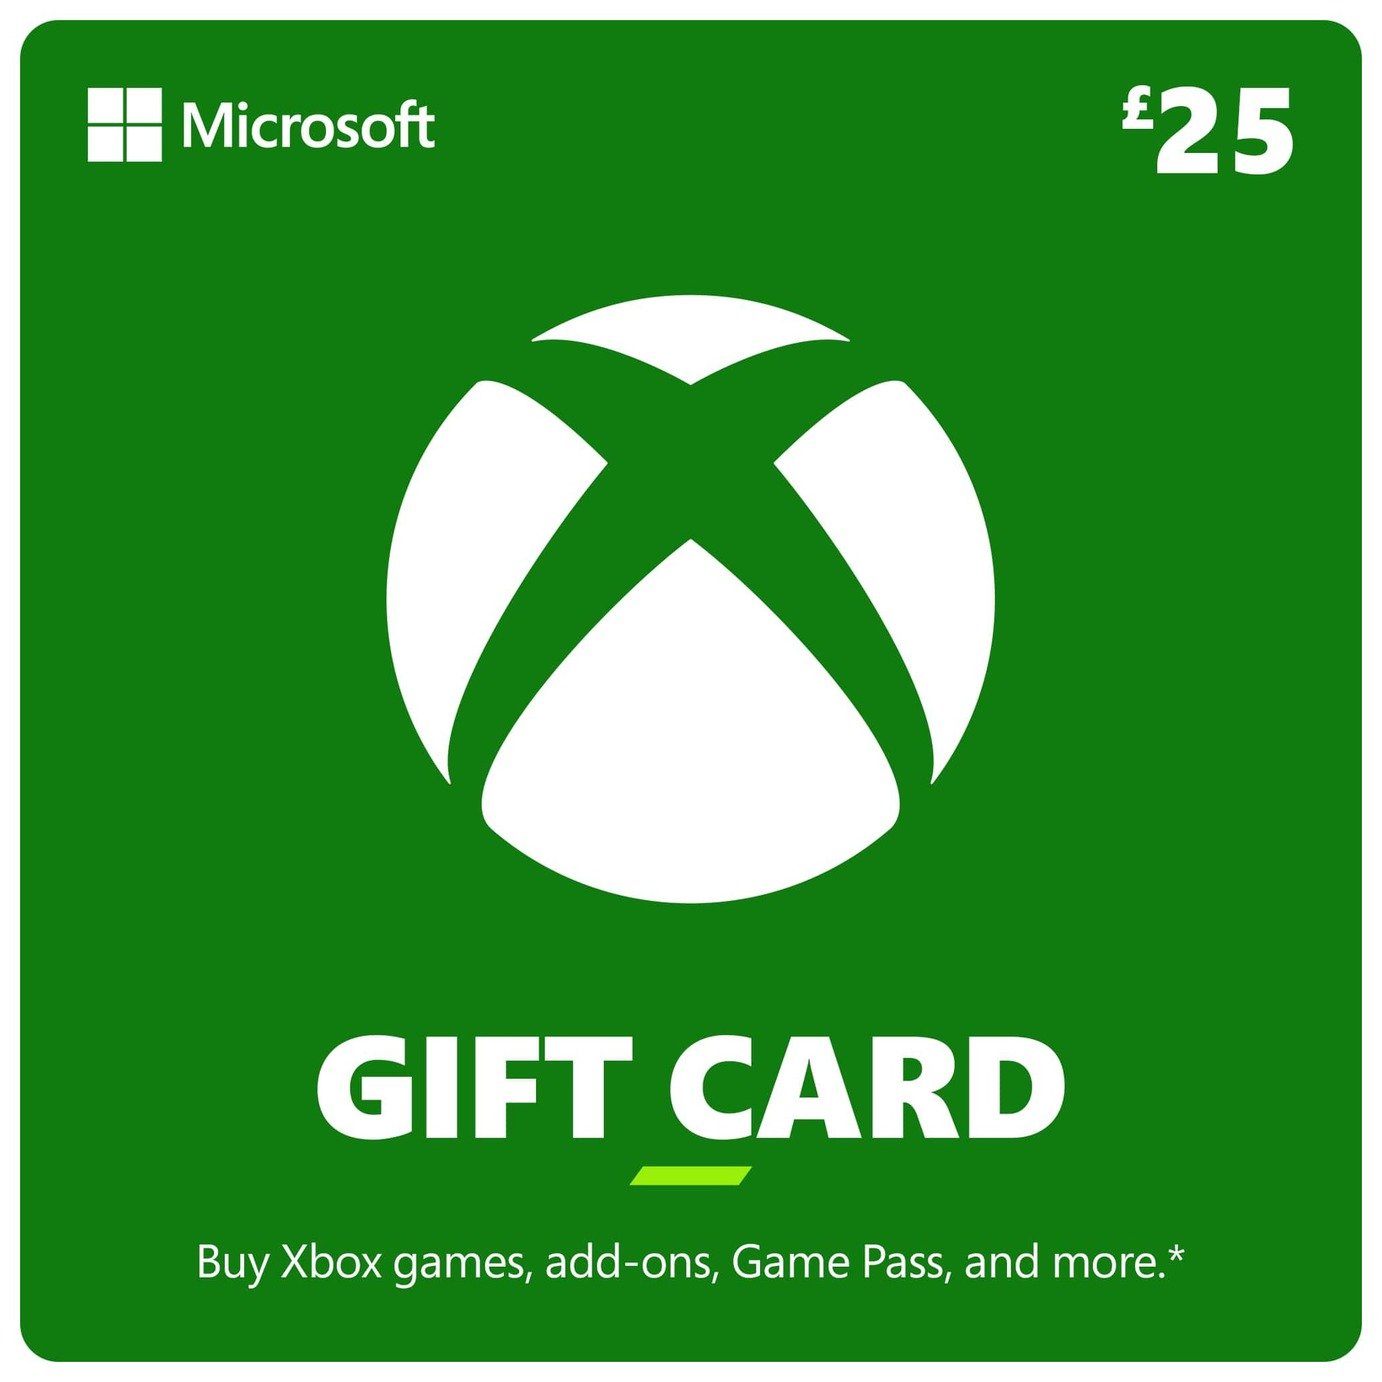 Xbox Live 25 GBP Gift Card